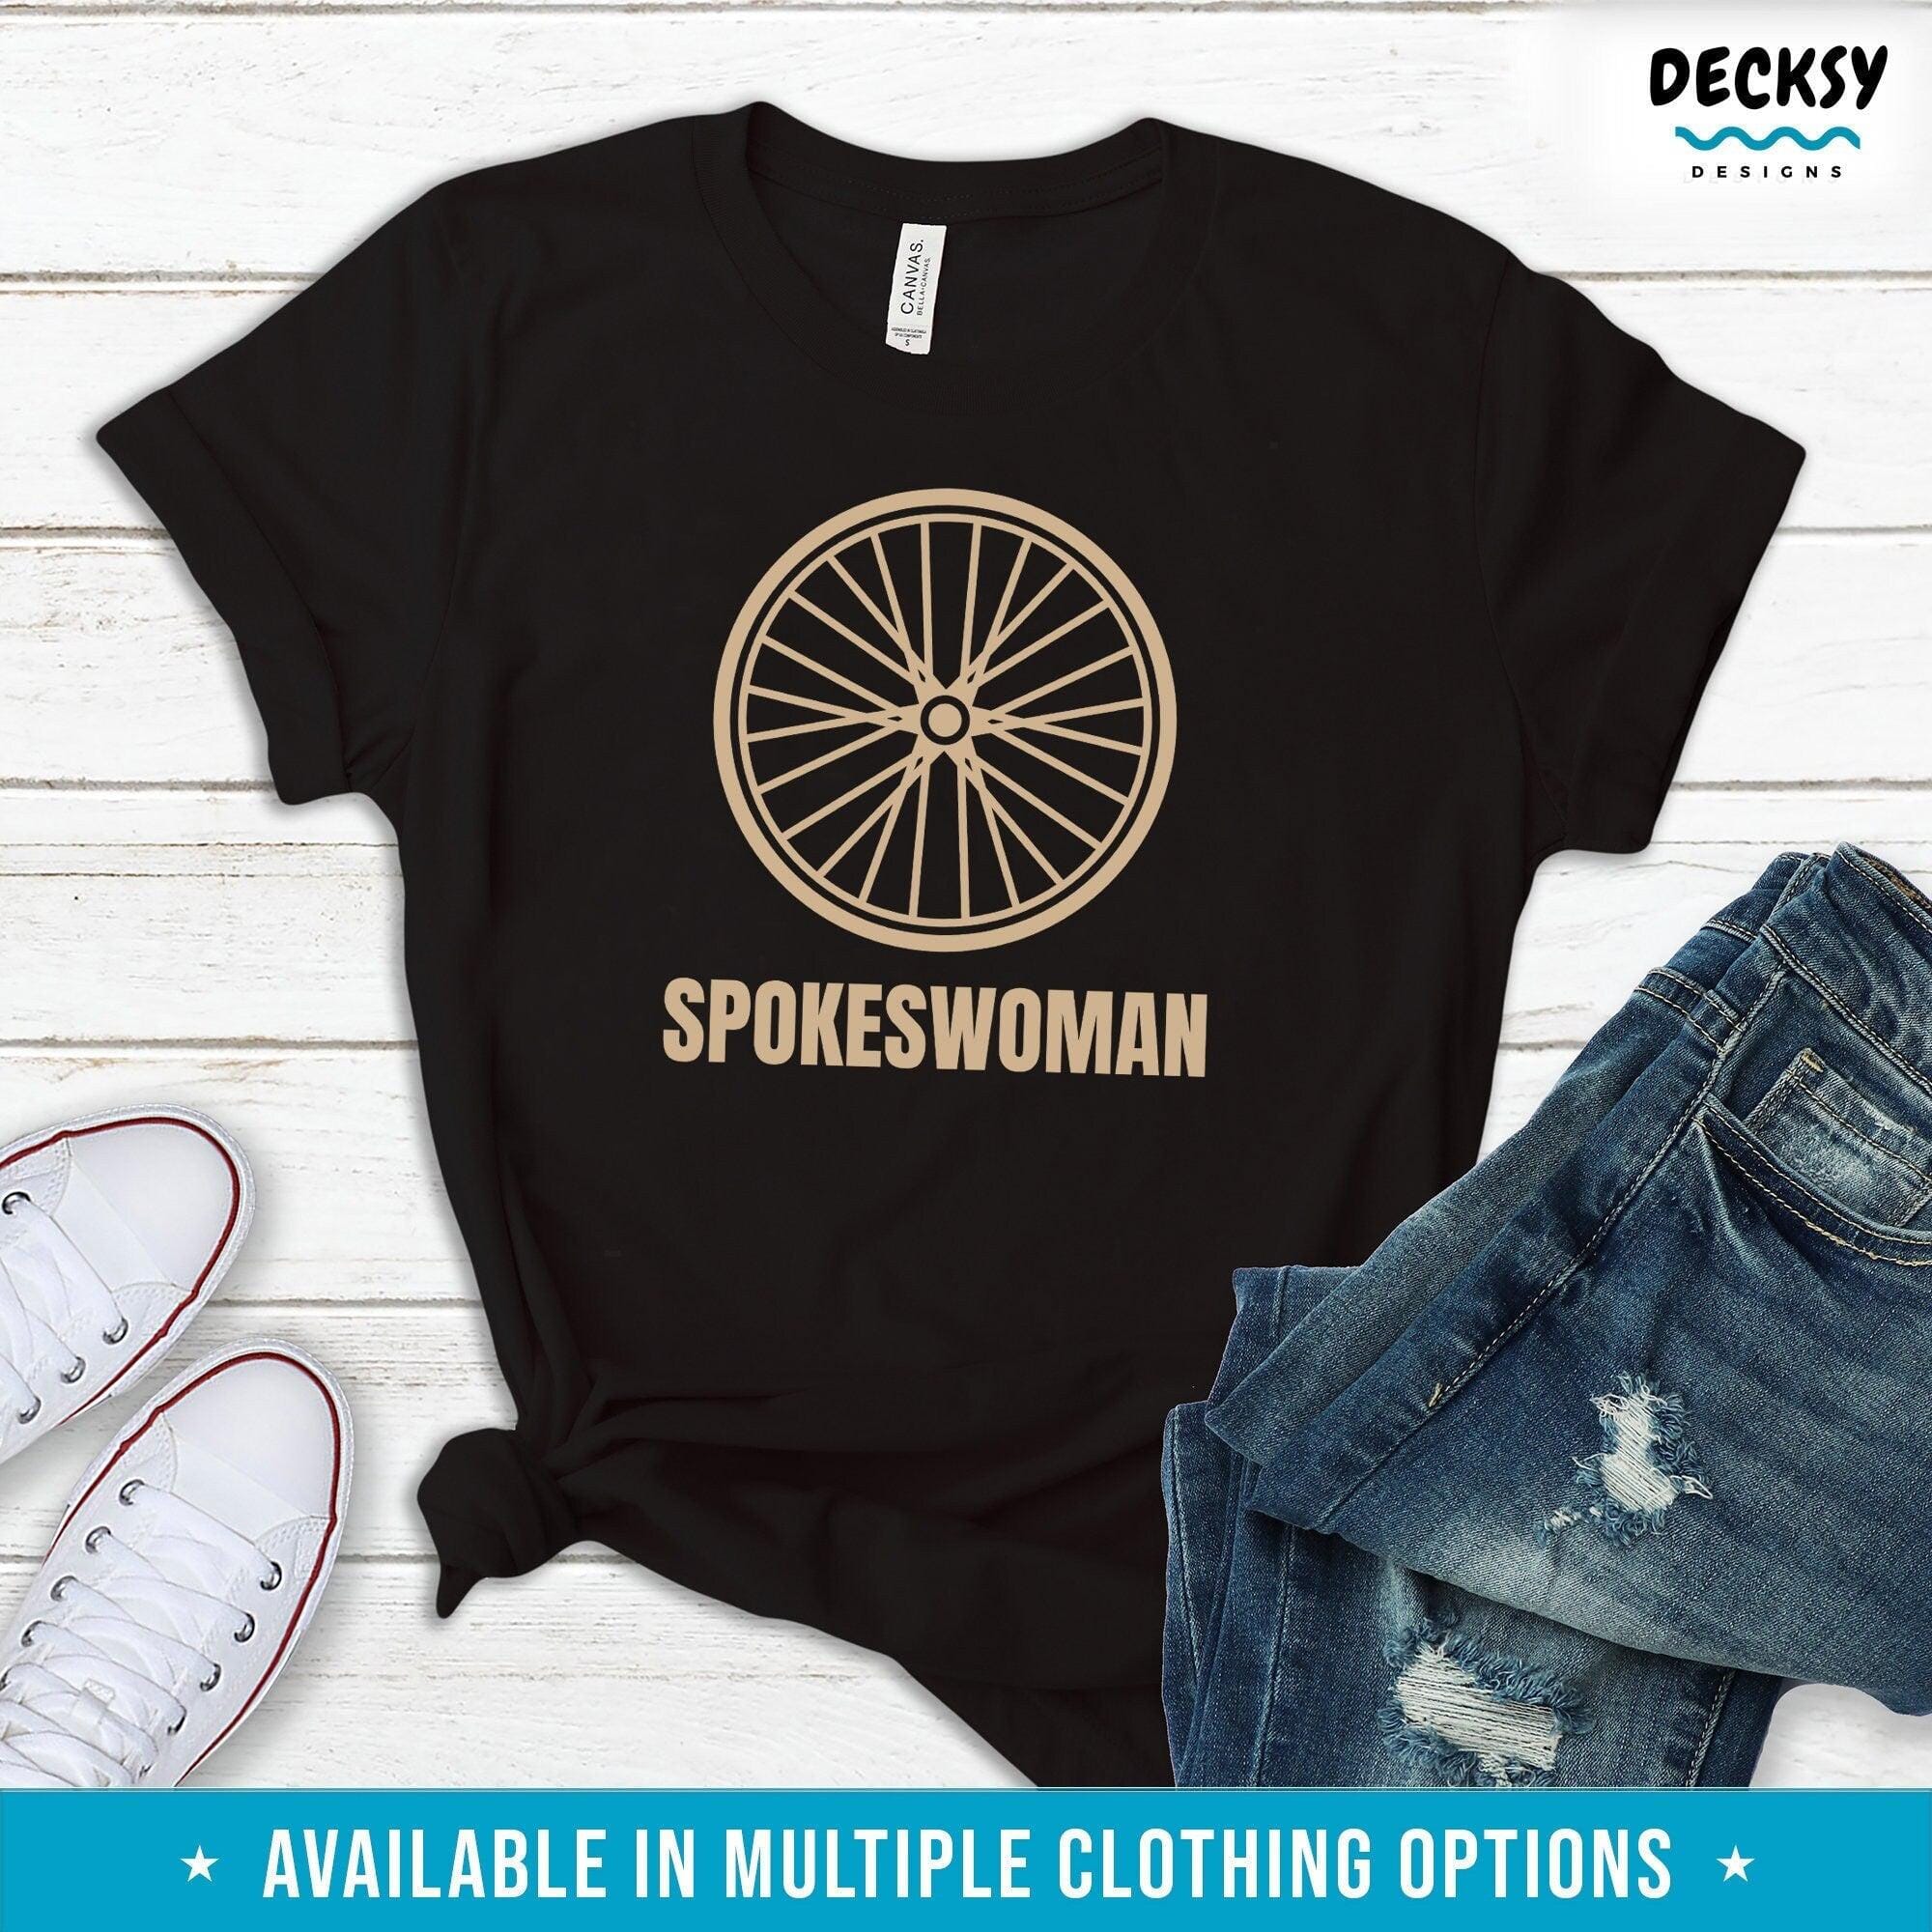 Cycling Shirt Women, Funny Biking Gifts For Her-Clothing:Gender-Neutral Adult Clothing:Tops & Tees:T-shirts:Graphic Tees-DecksyDesigns